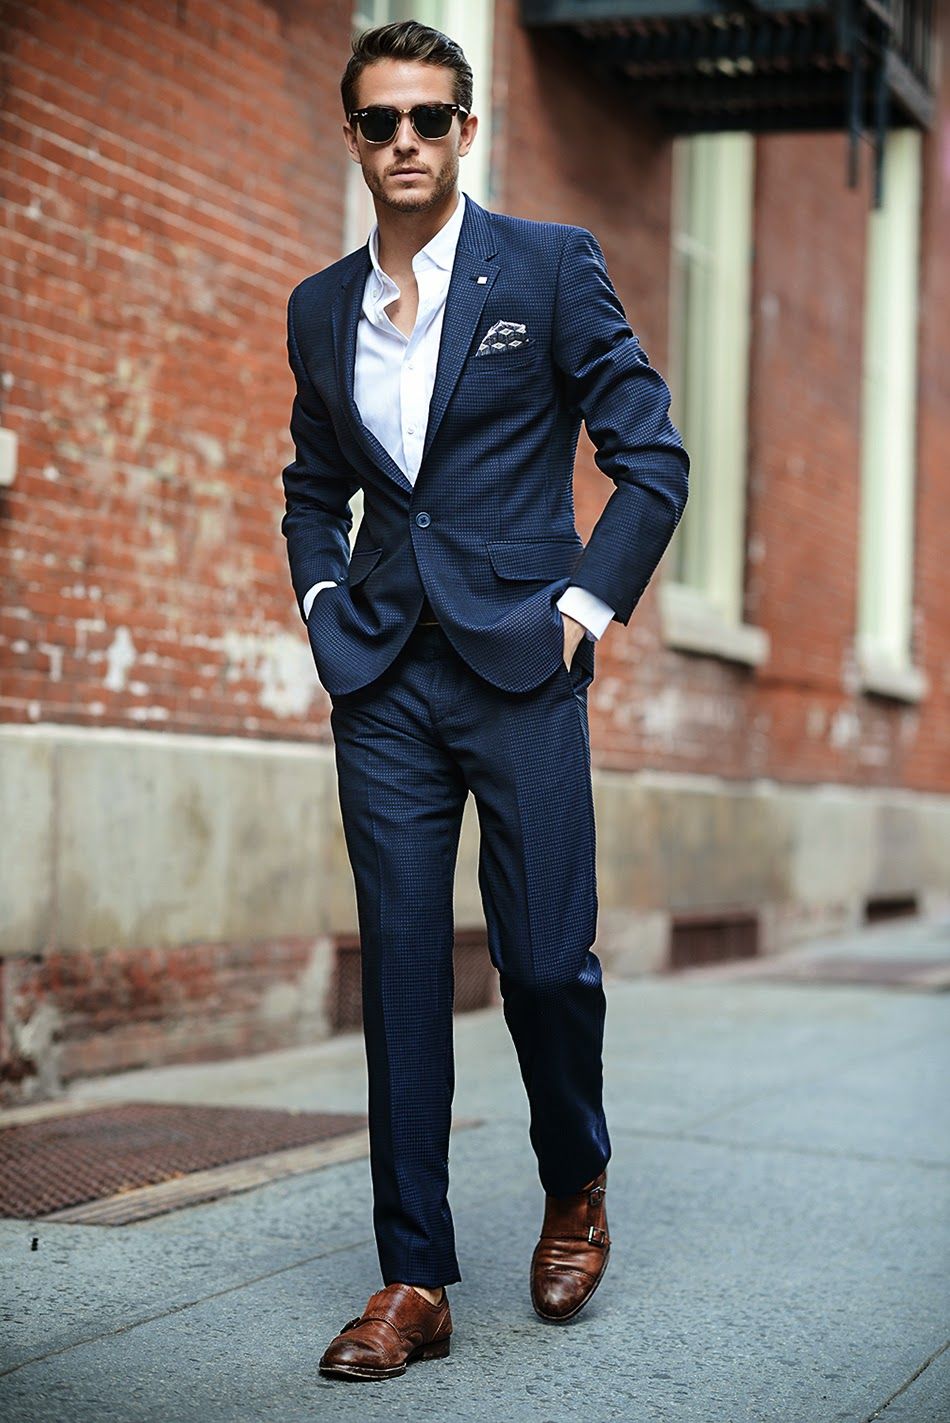 styling blue suit with brown shoes for men 2